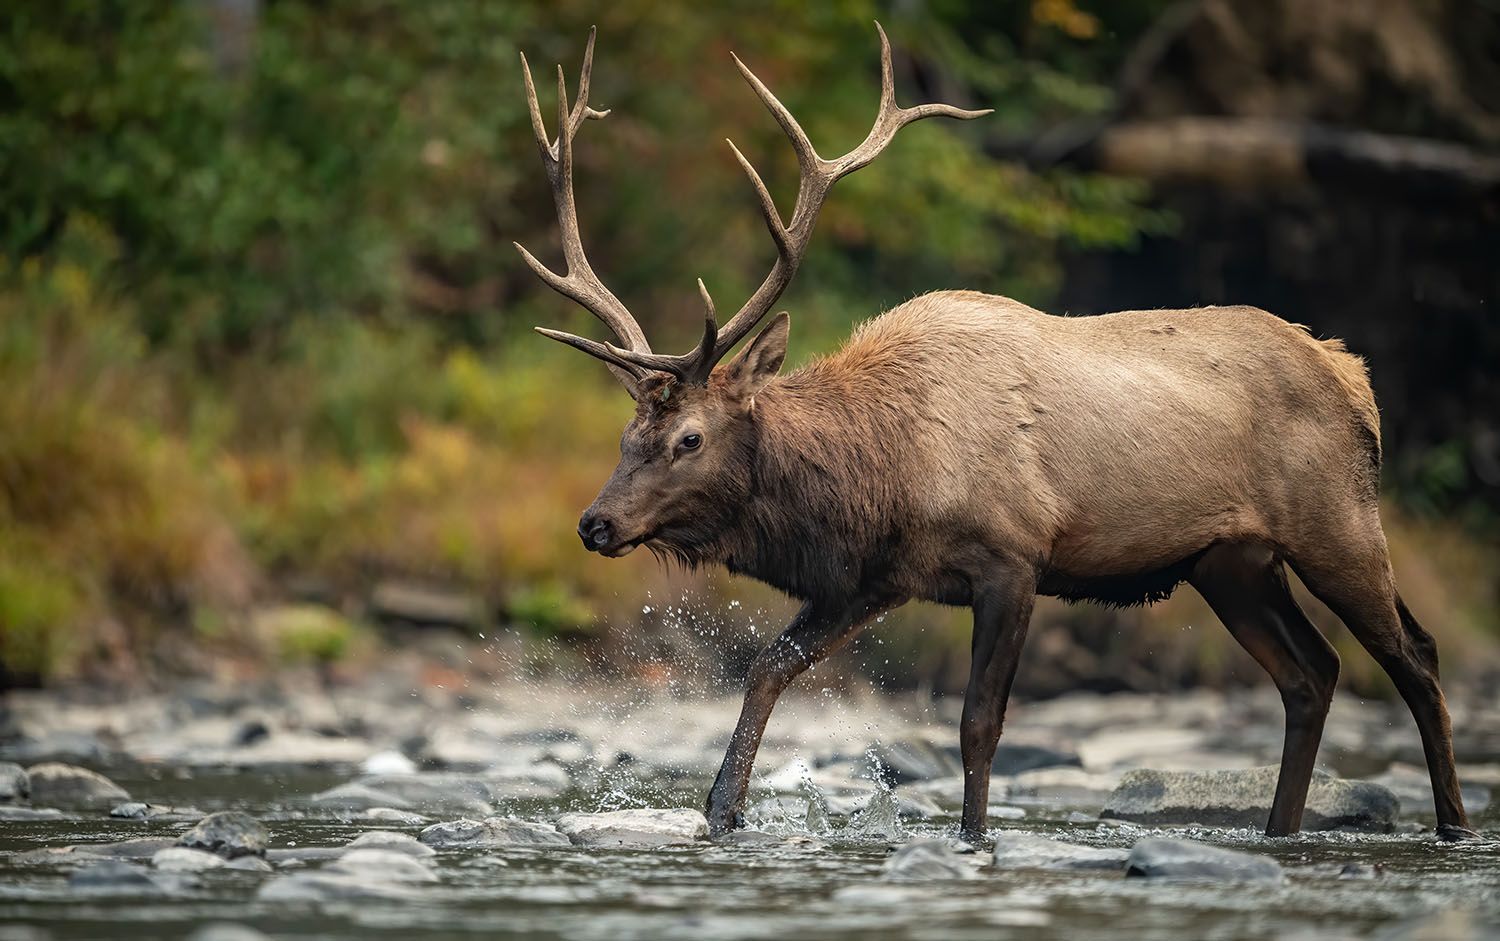 A bull elk walking in a stream with trees in the background